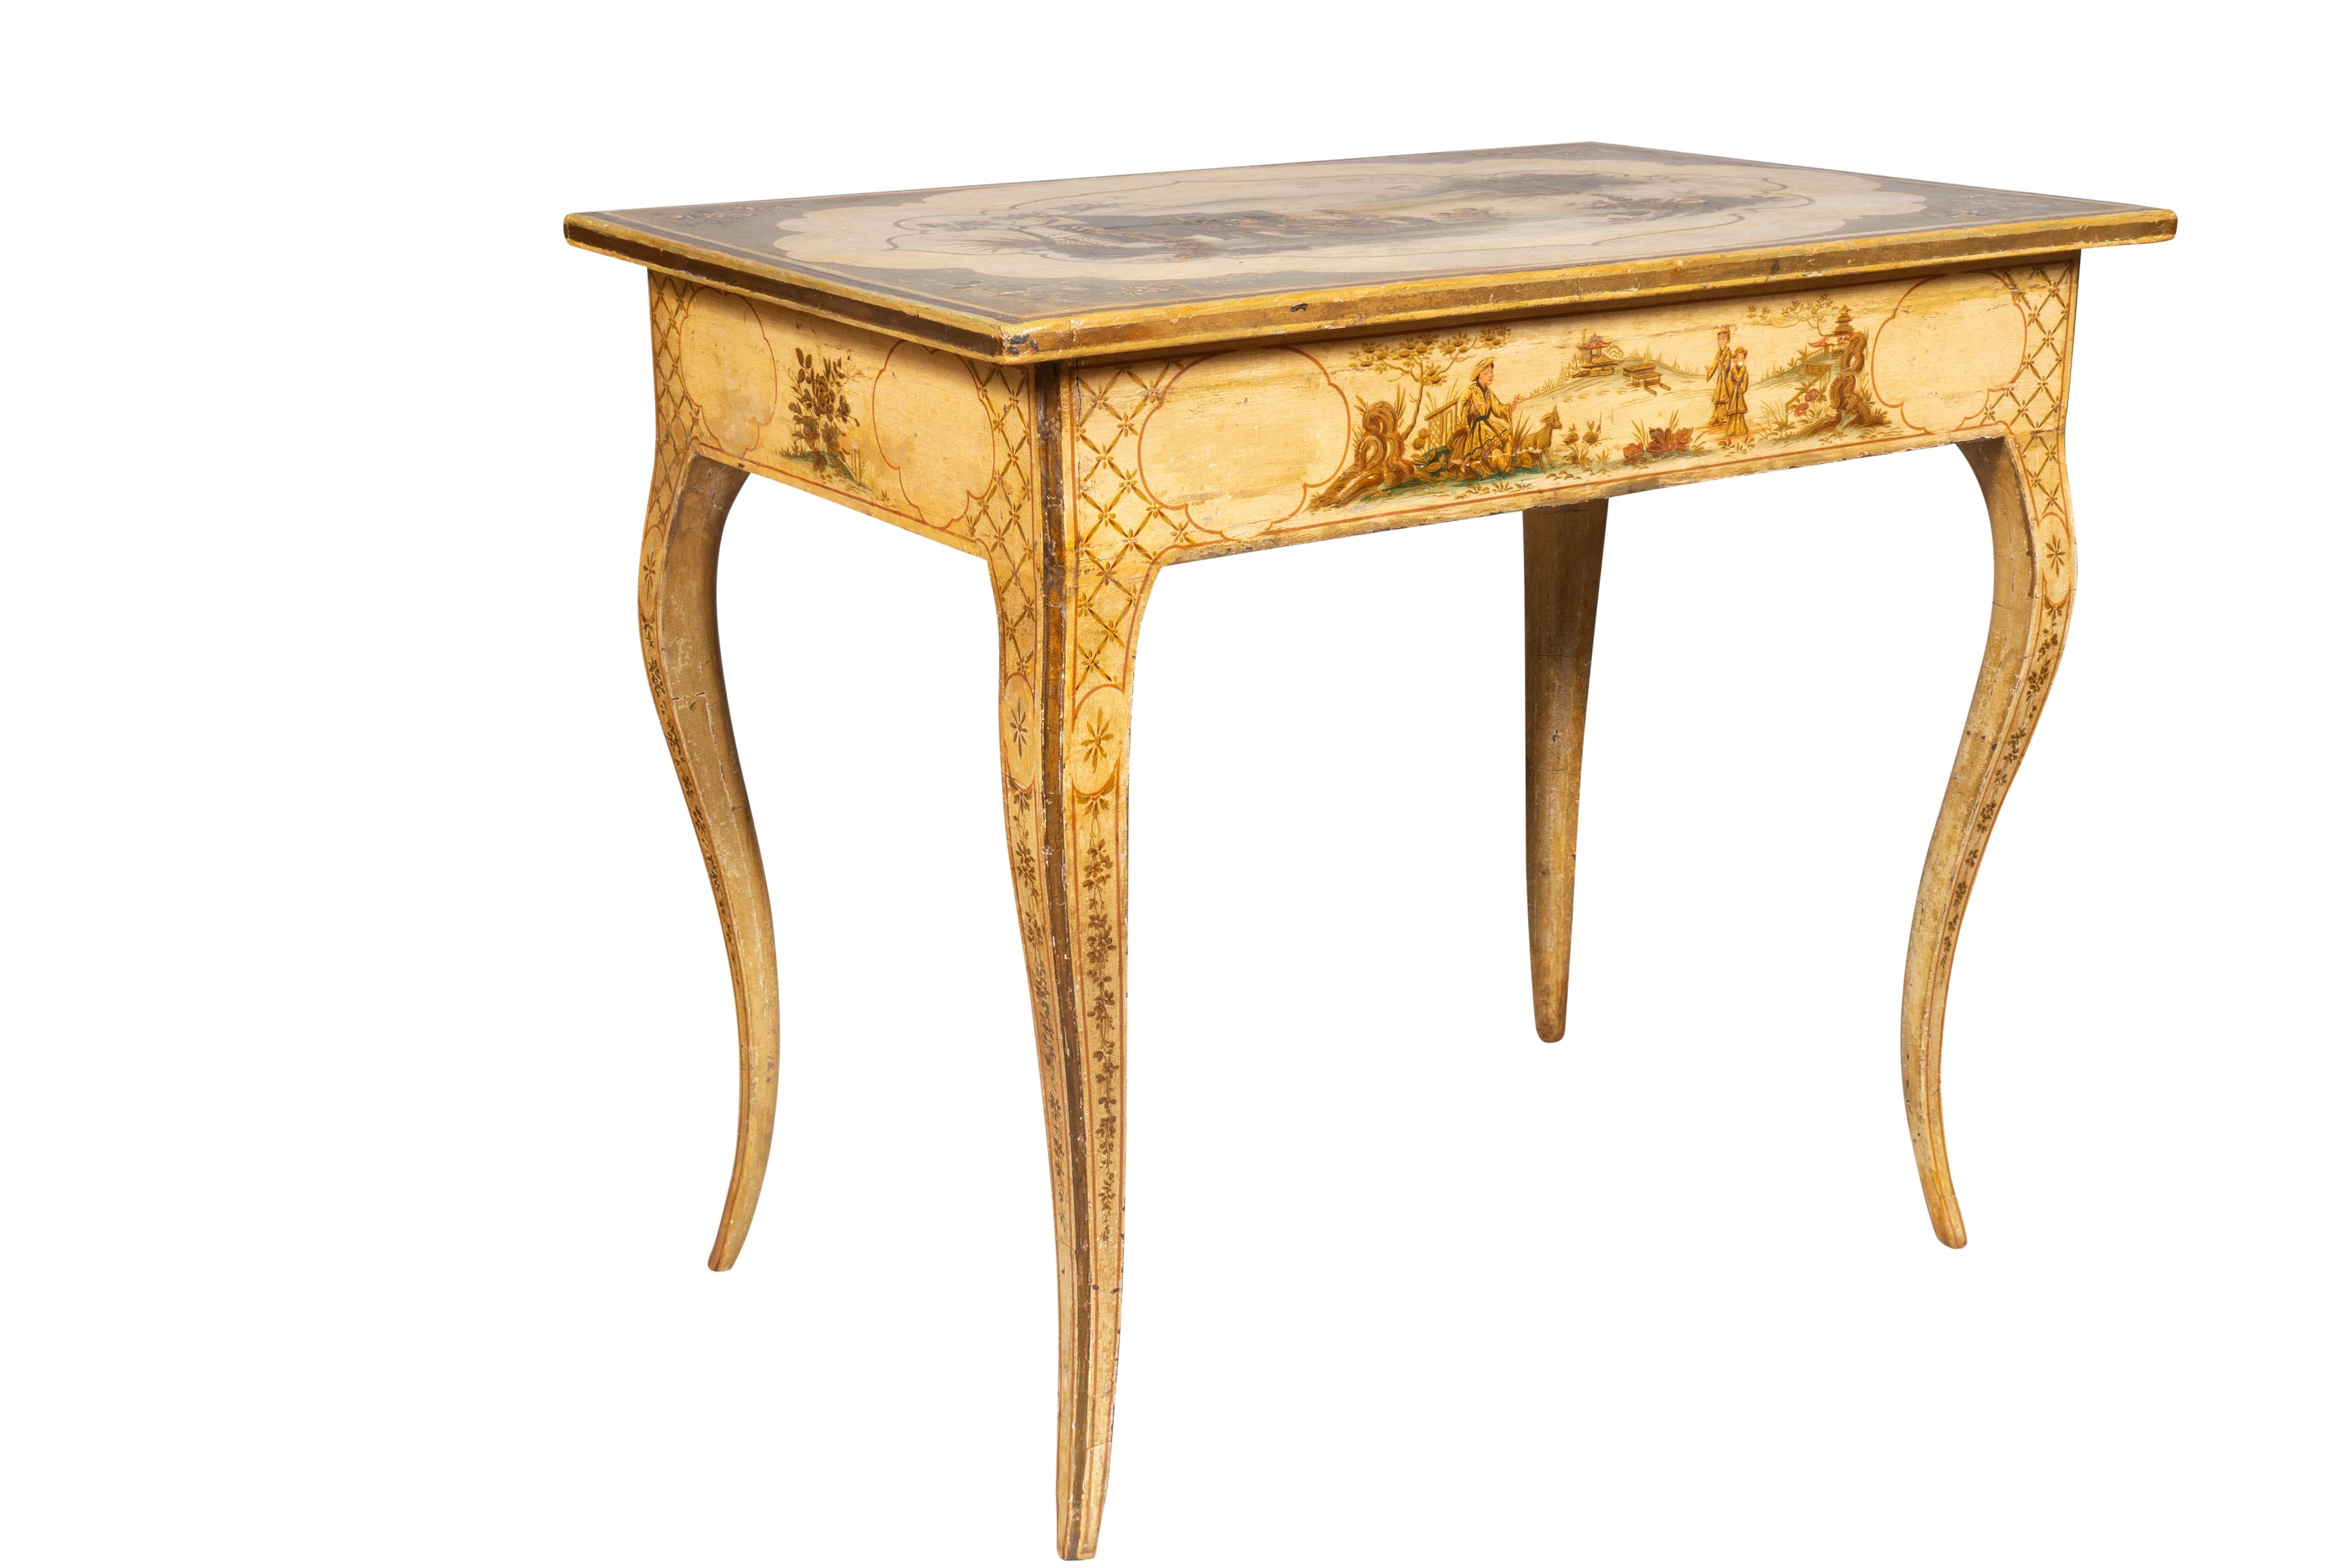 Painted Italian Rococo Chinoiserie Decorated Table For Sale